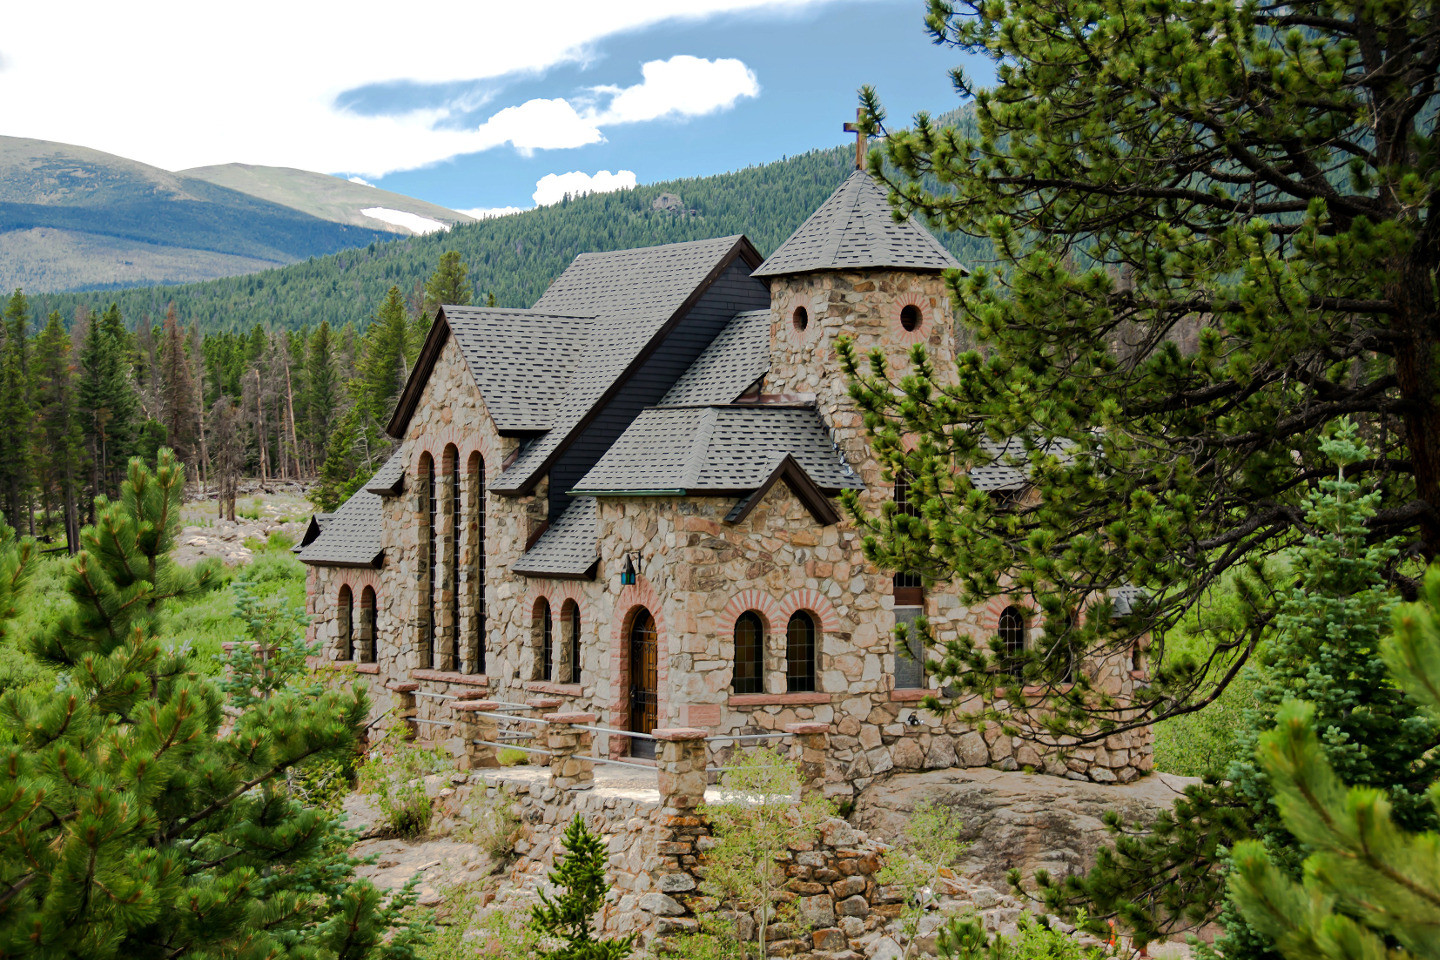 Wedding Venues In Colorado
 What You Need to Know About Getting Married in Colorado